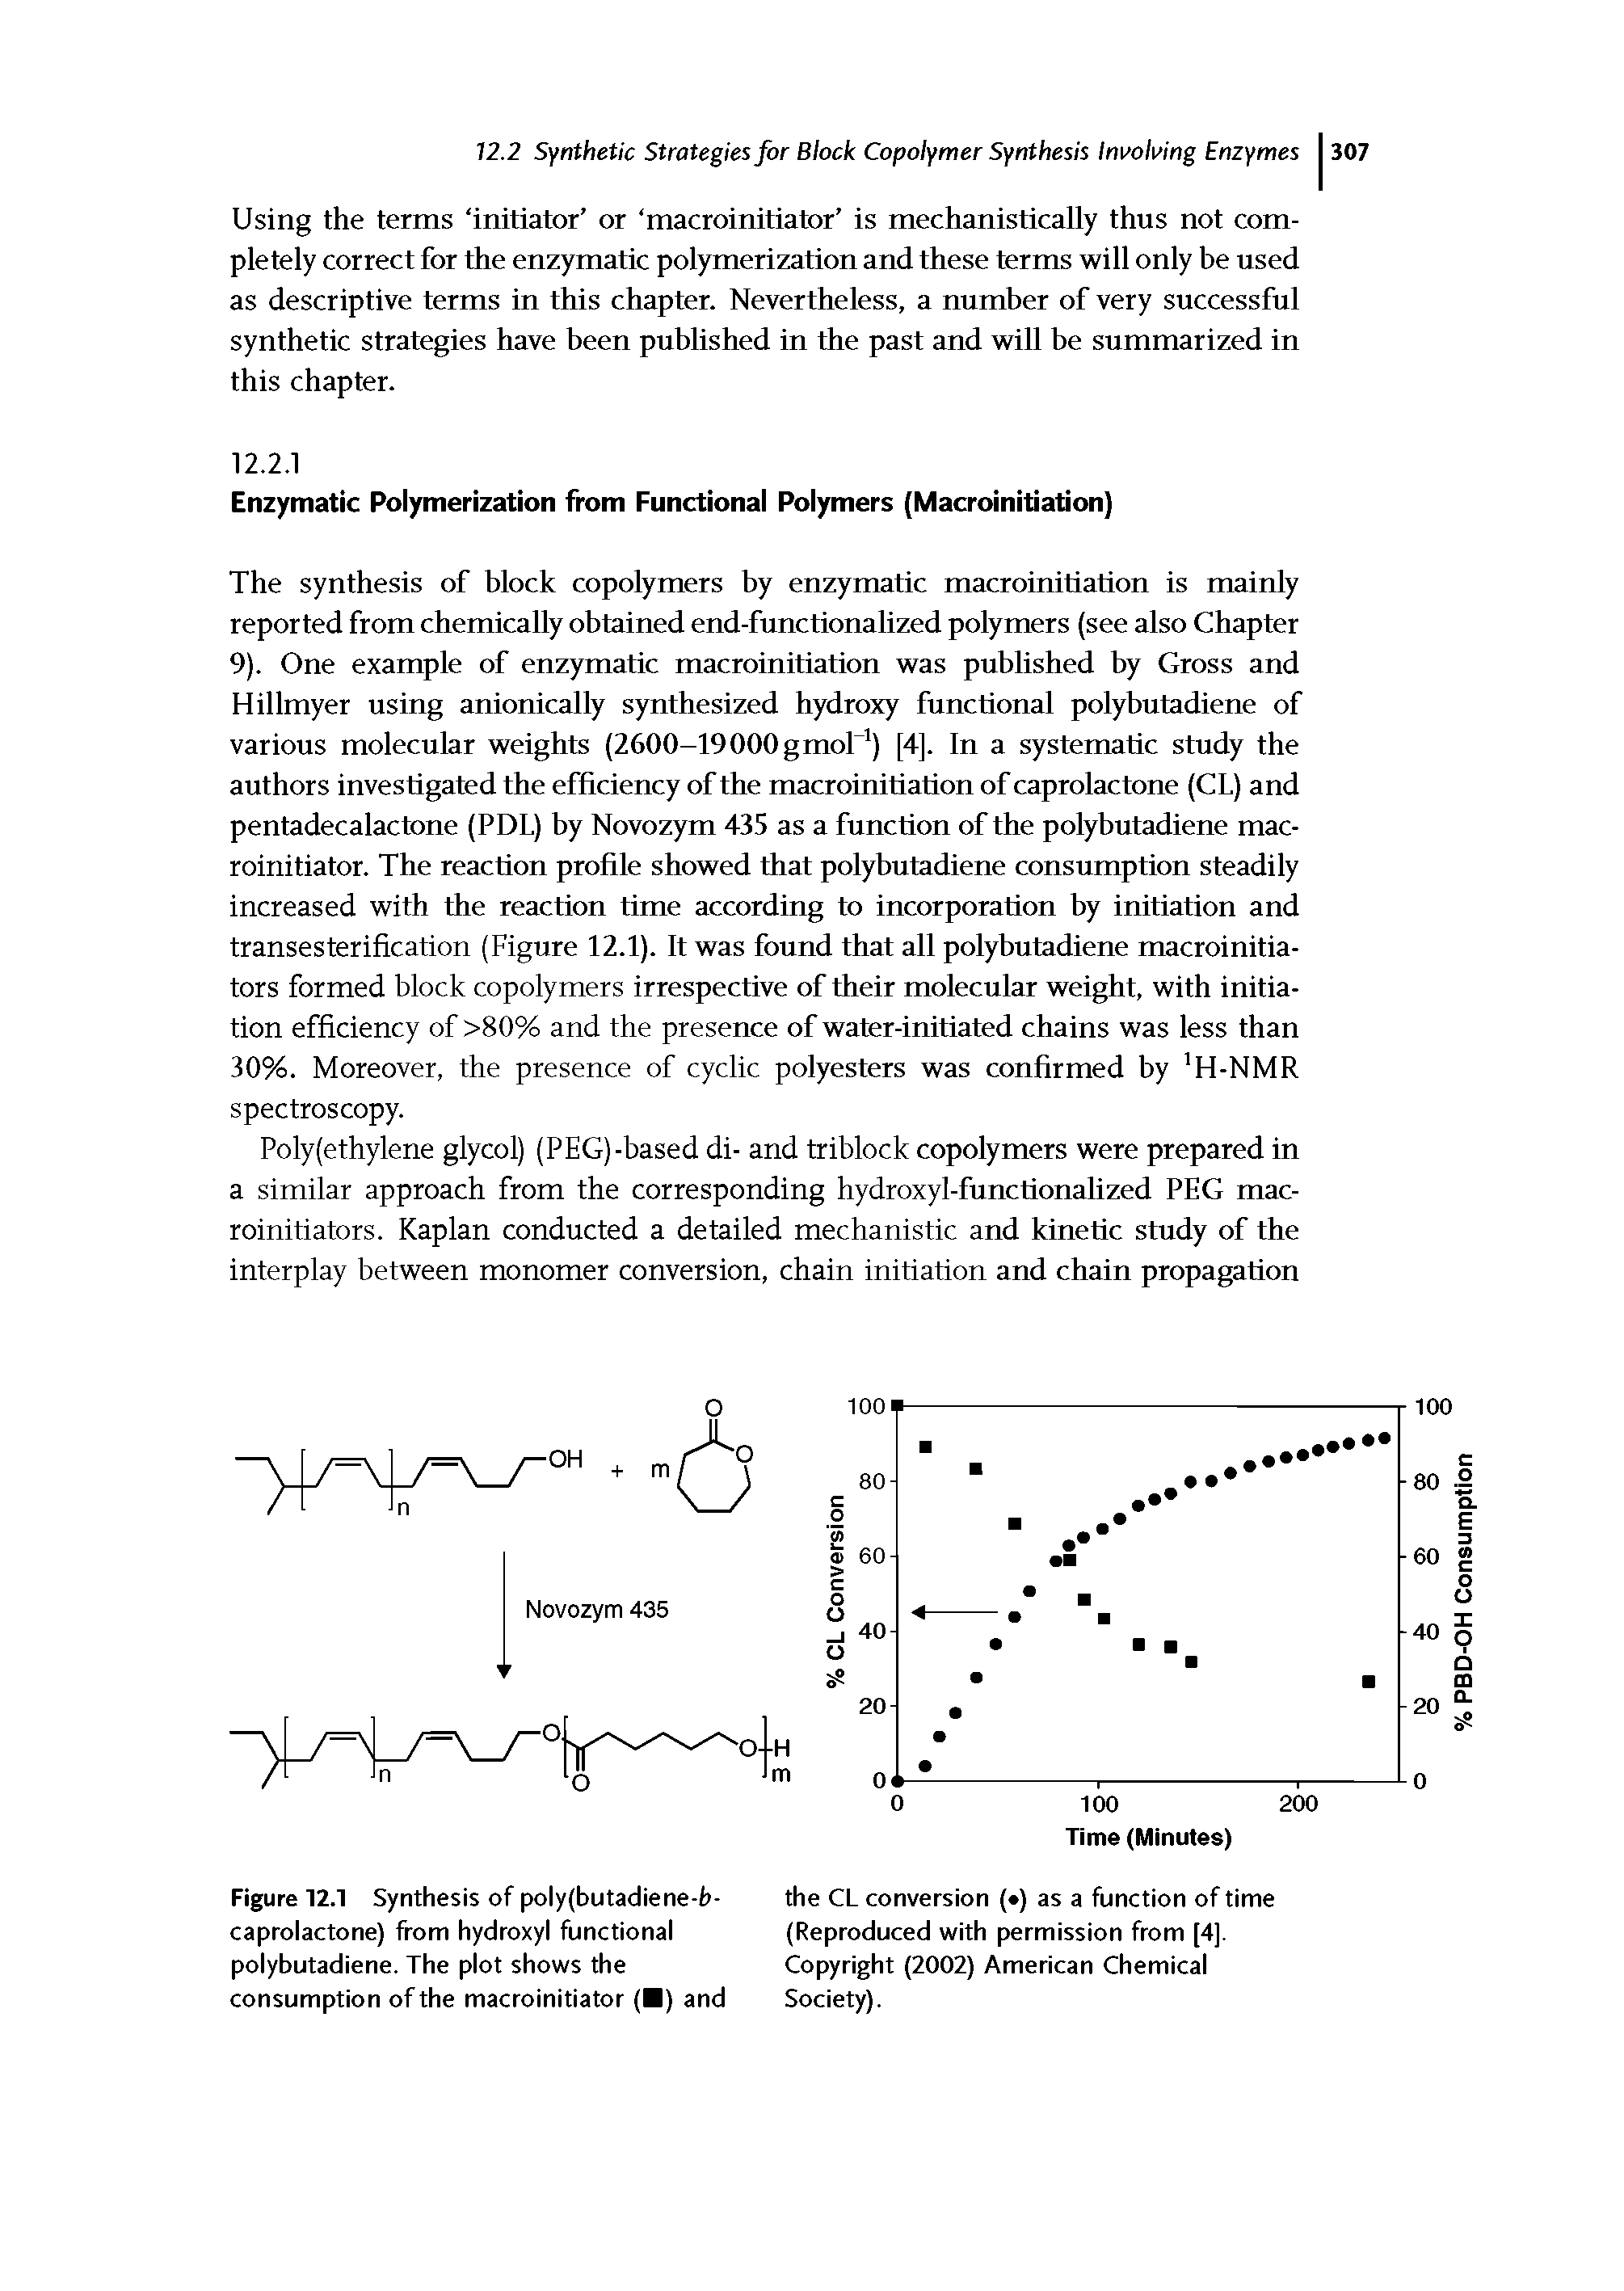 Figure 12.1 Synthesis of poly(butadiene-b-caprolactone) from hydroxyl functional polybutadiene. The plot shows the consumption of the macroinitiator ( ) and...